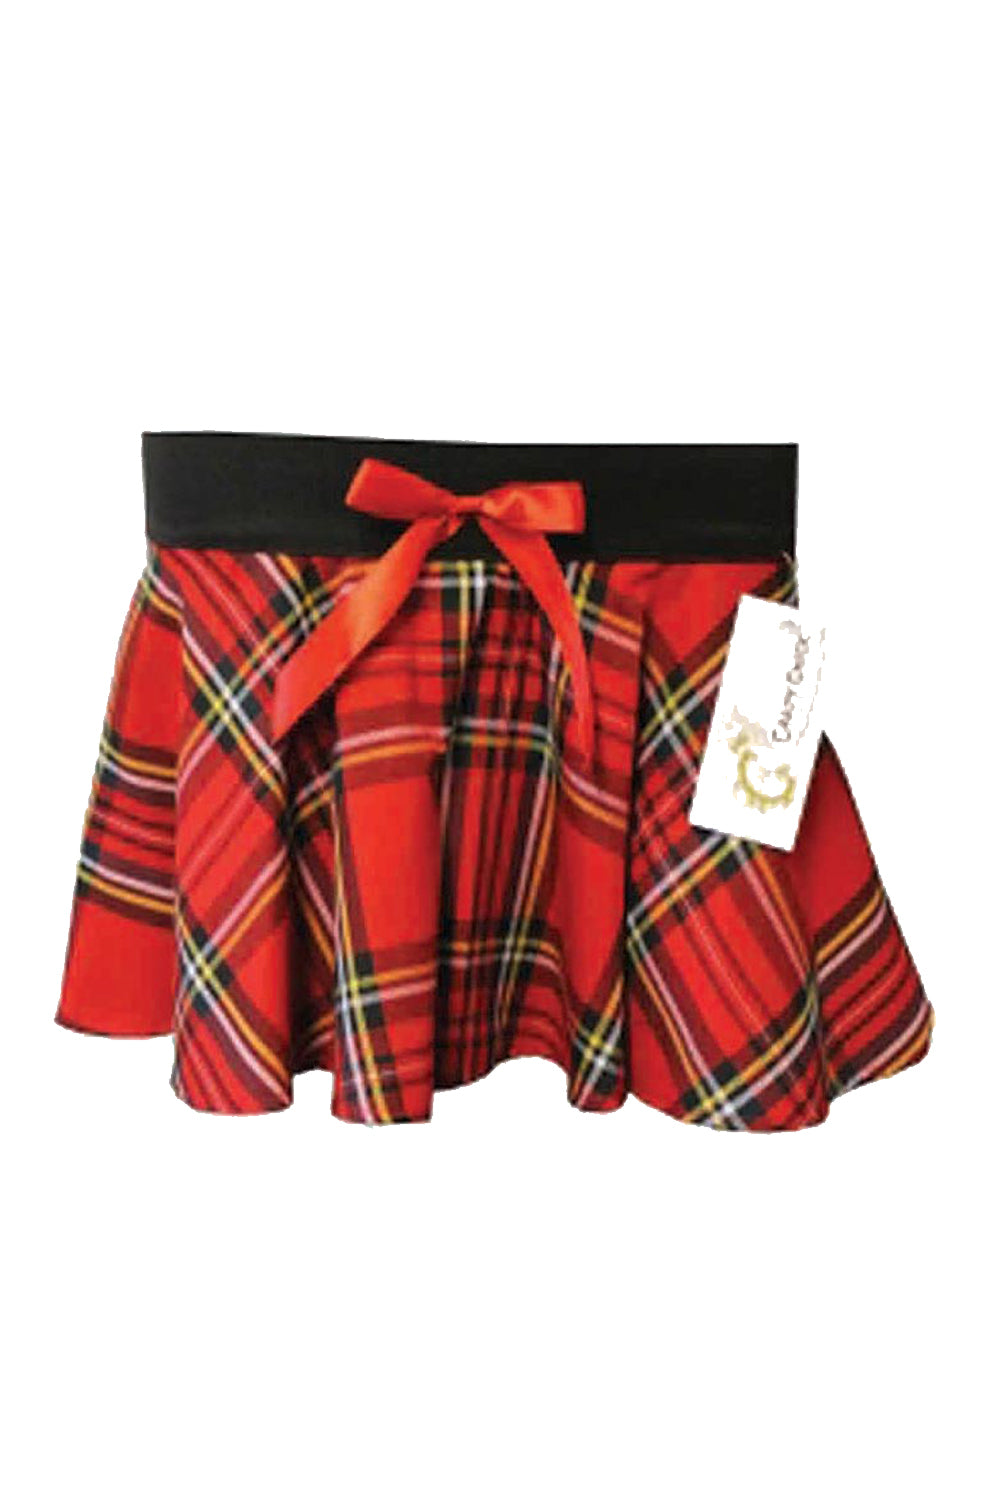 Crazy Chick Tartan Skirt With Bow (9 Inches)